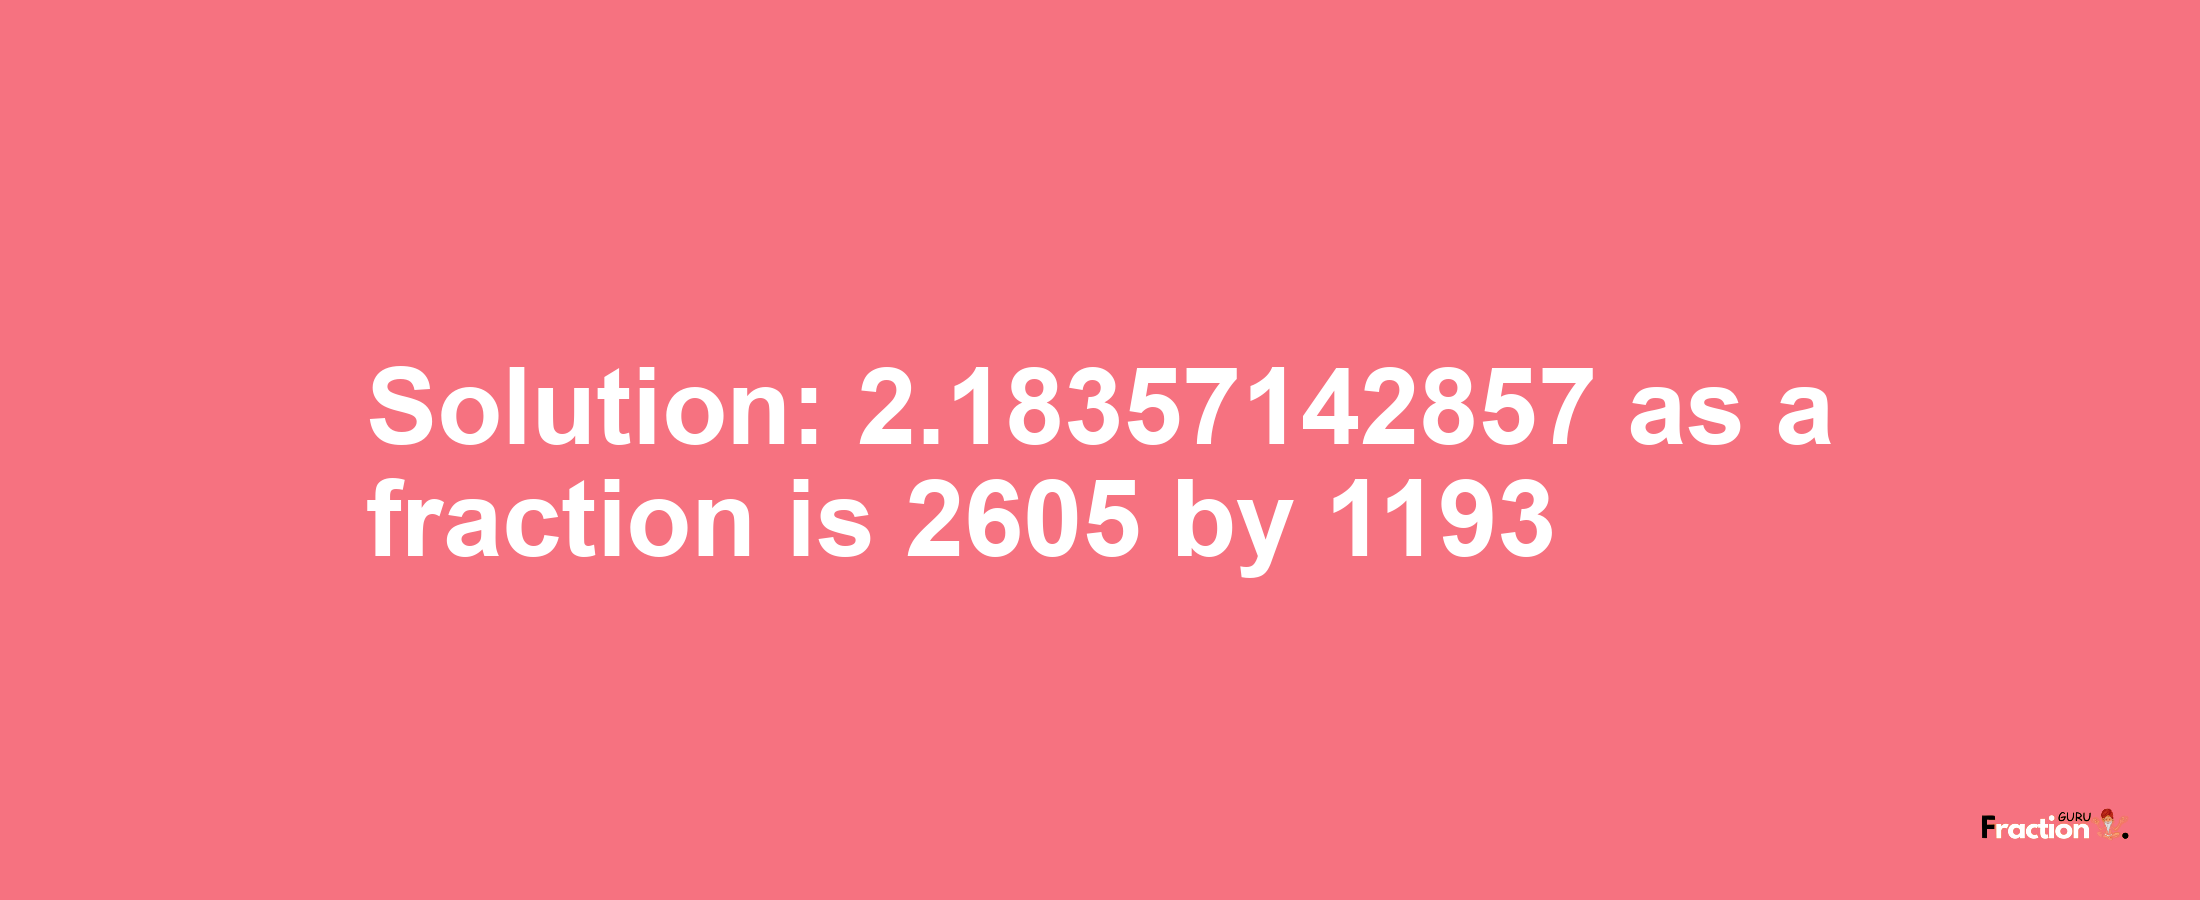 Solution:2.18357142857 as a fraction is 2605/1193